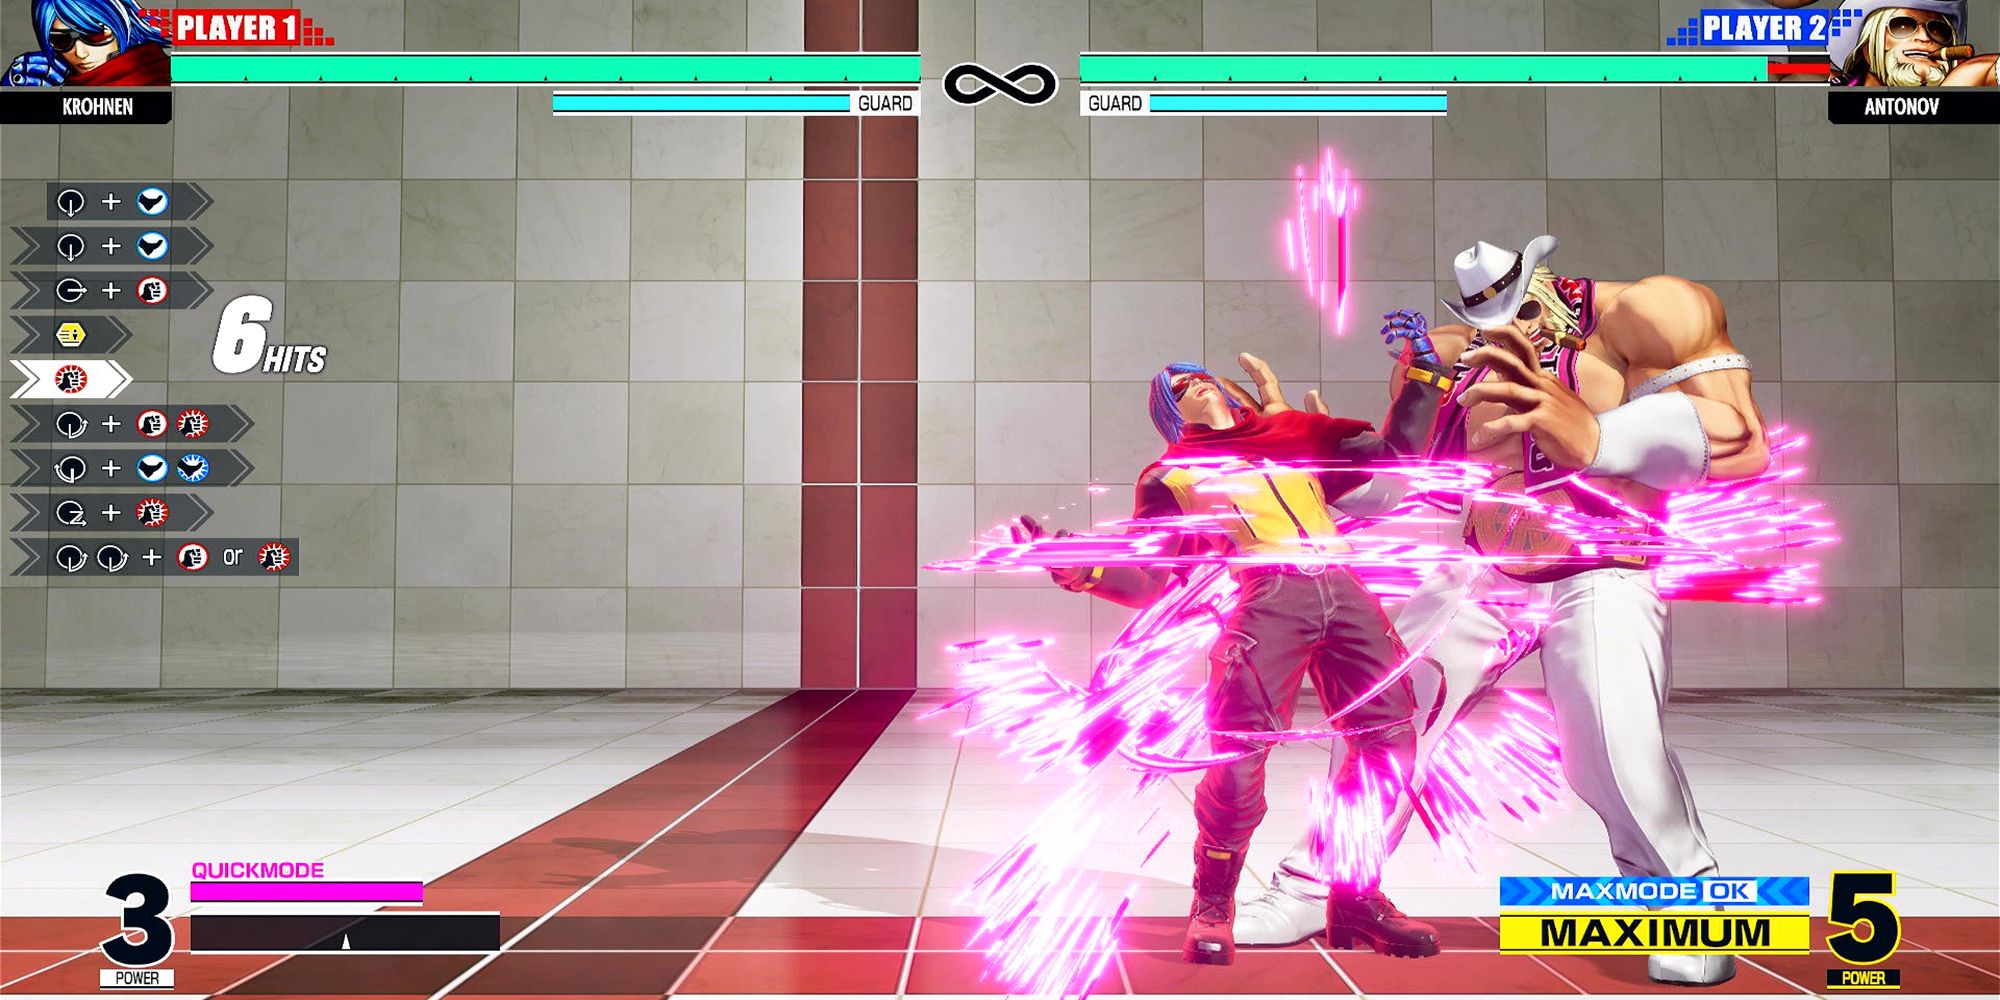 Shen'ui enters Quick Max Mode in a combo attack against Antonov in the Training Stage in The King Of Fighters 15.